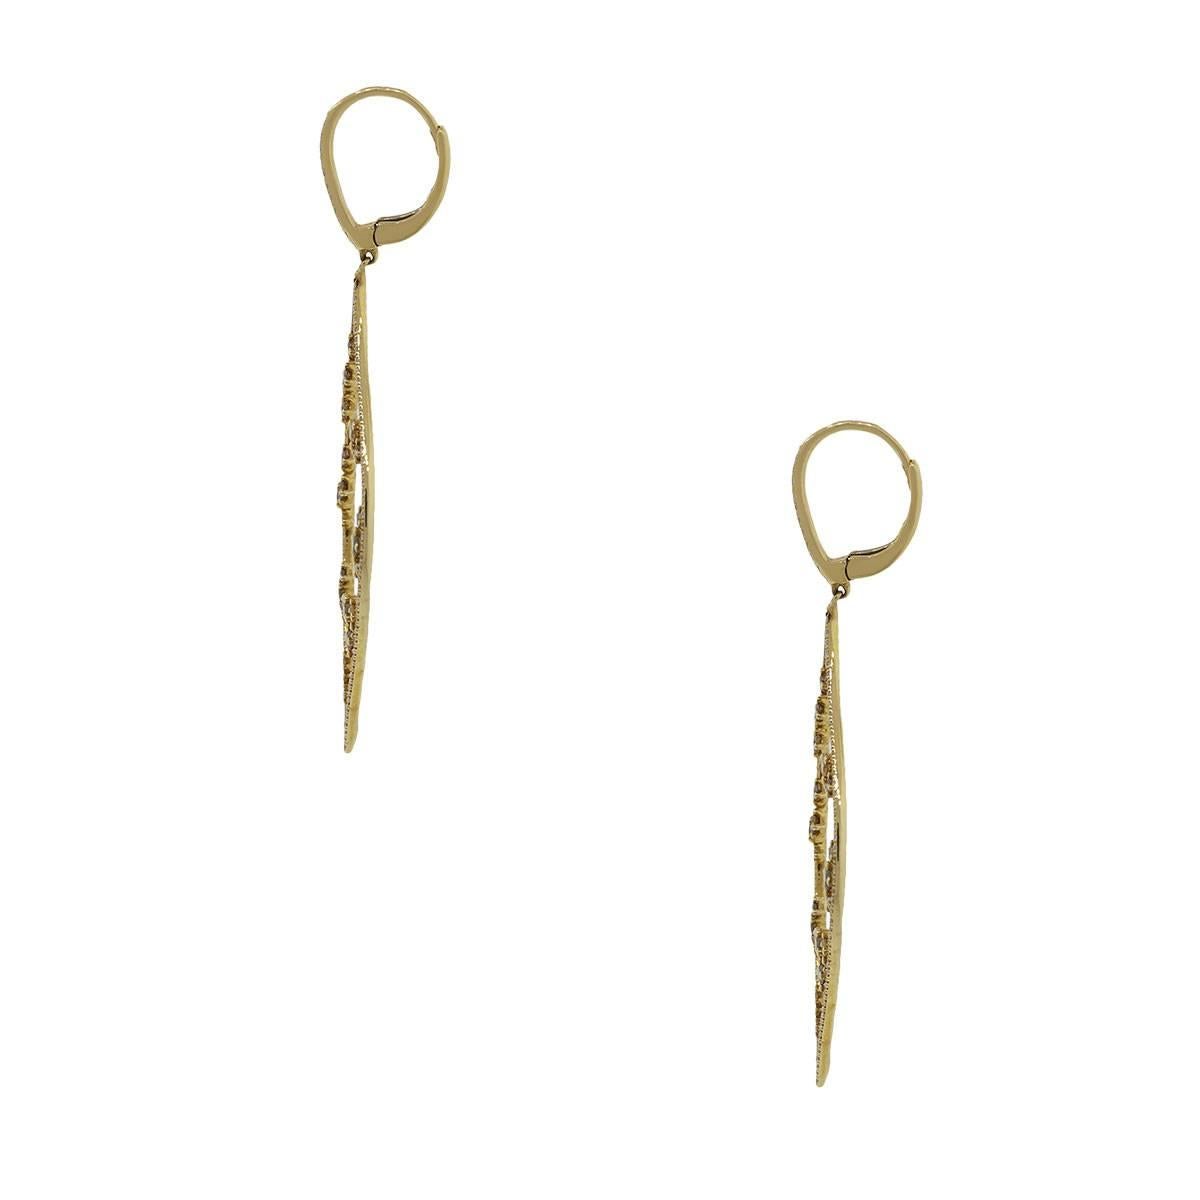 Style: Dangle earrings
Material: 18k yellow gold
Diamond Details: Approximately 1.84ctw warm champagne diamonds. The diamonds on these earrings are G/H in color and VS in clarity.
Earring Measurements: 2.50″ x 0.10″ x 0.95″
Fastening: Lever